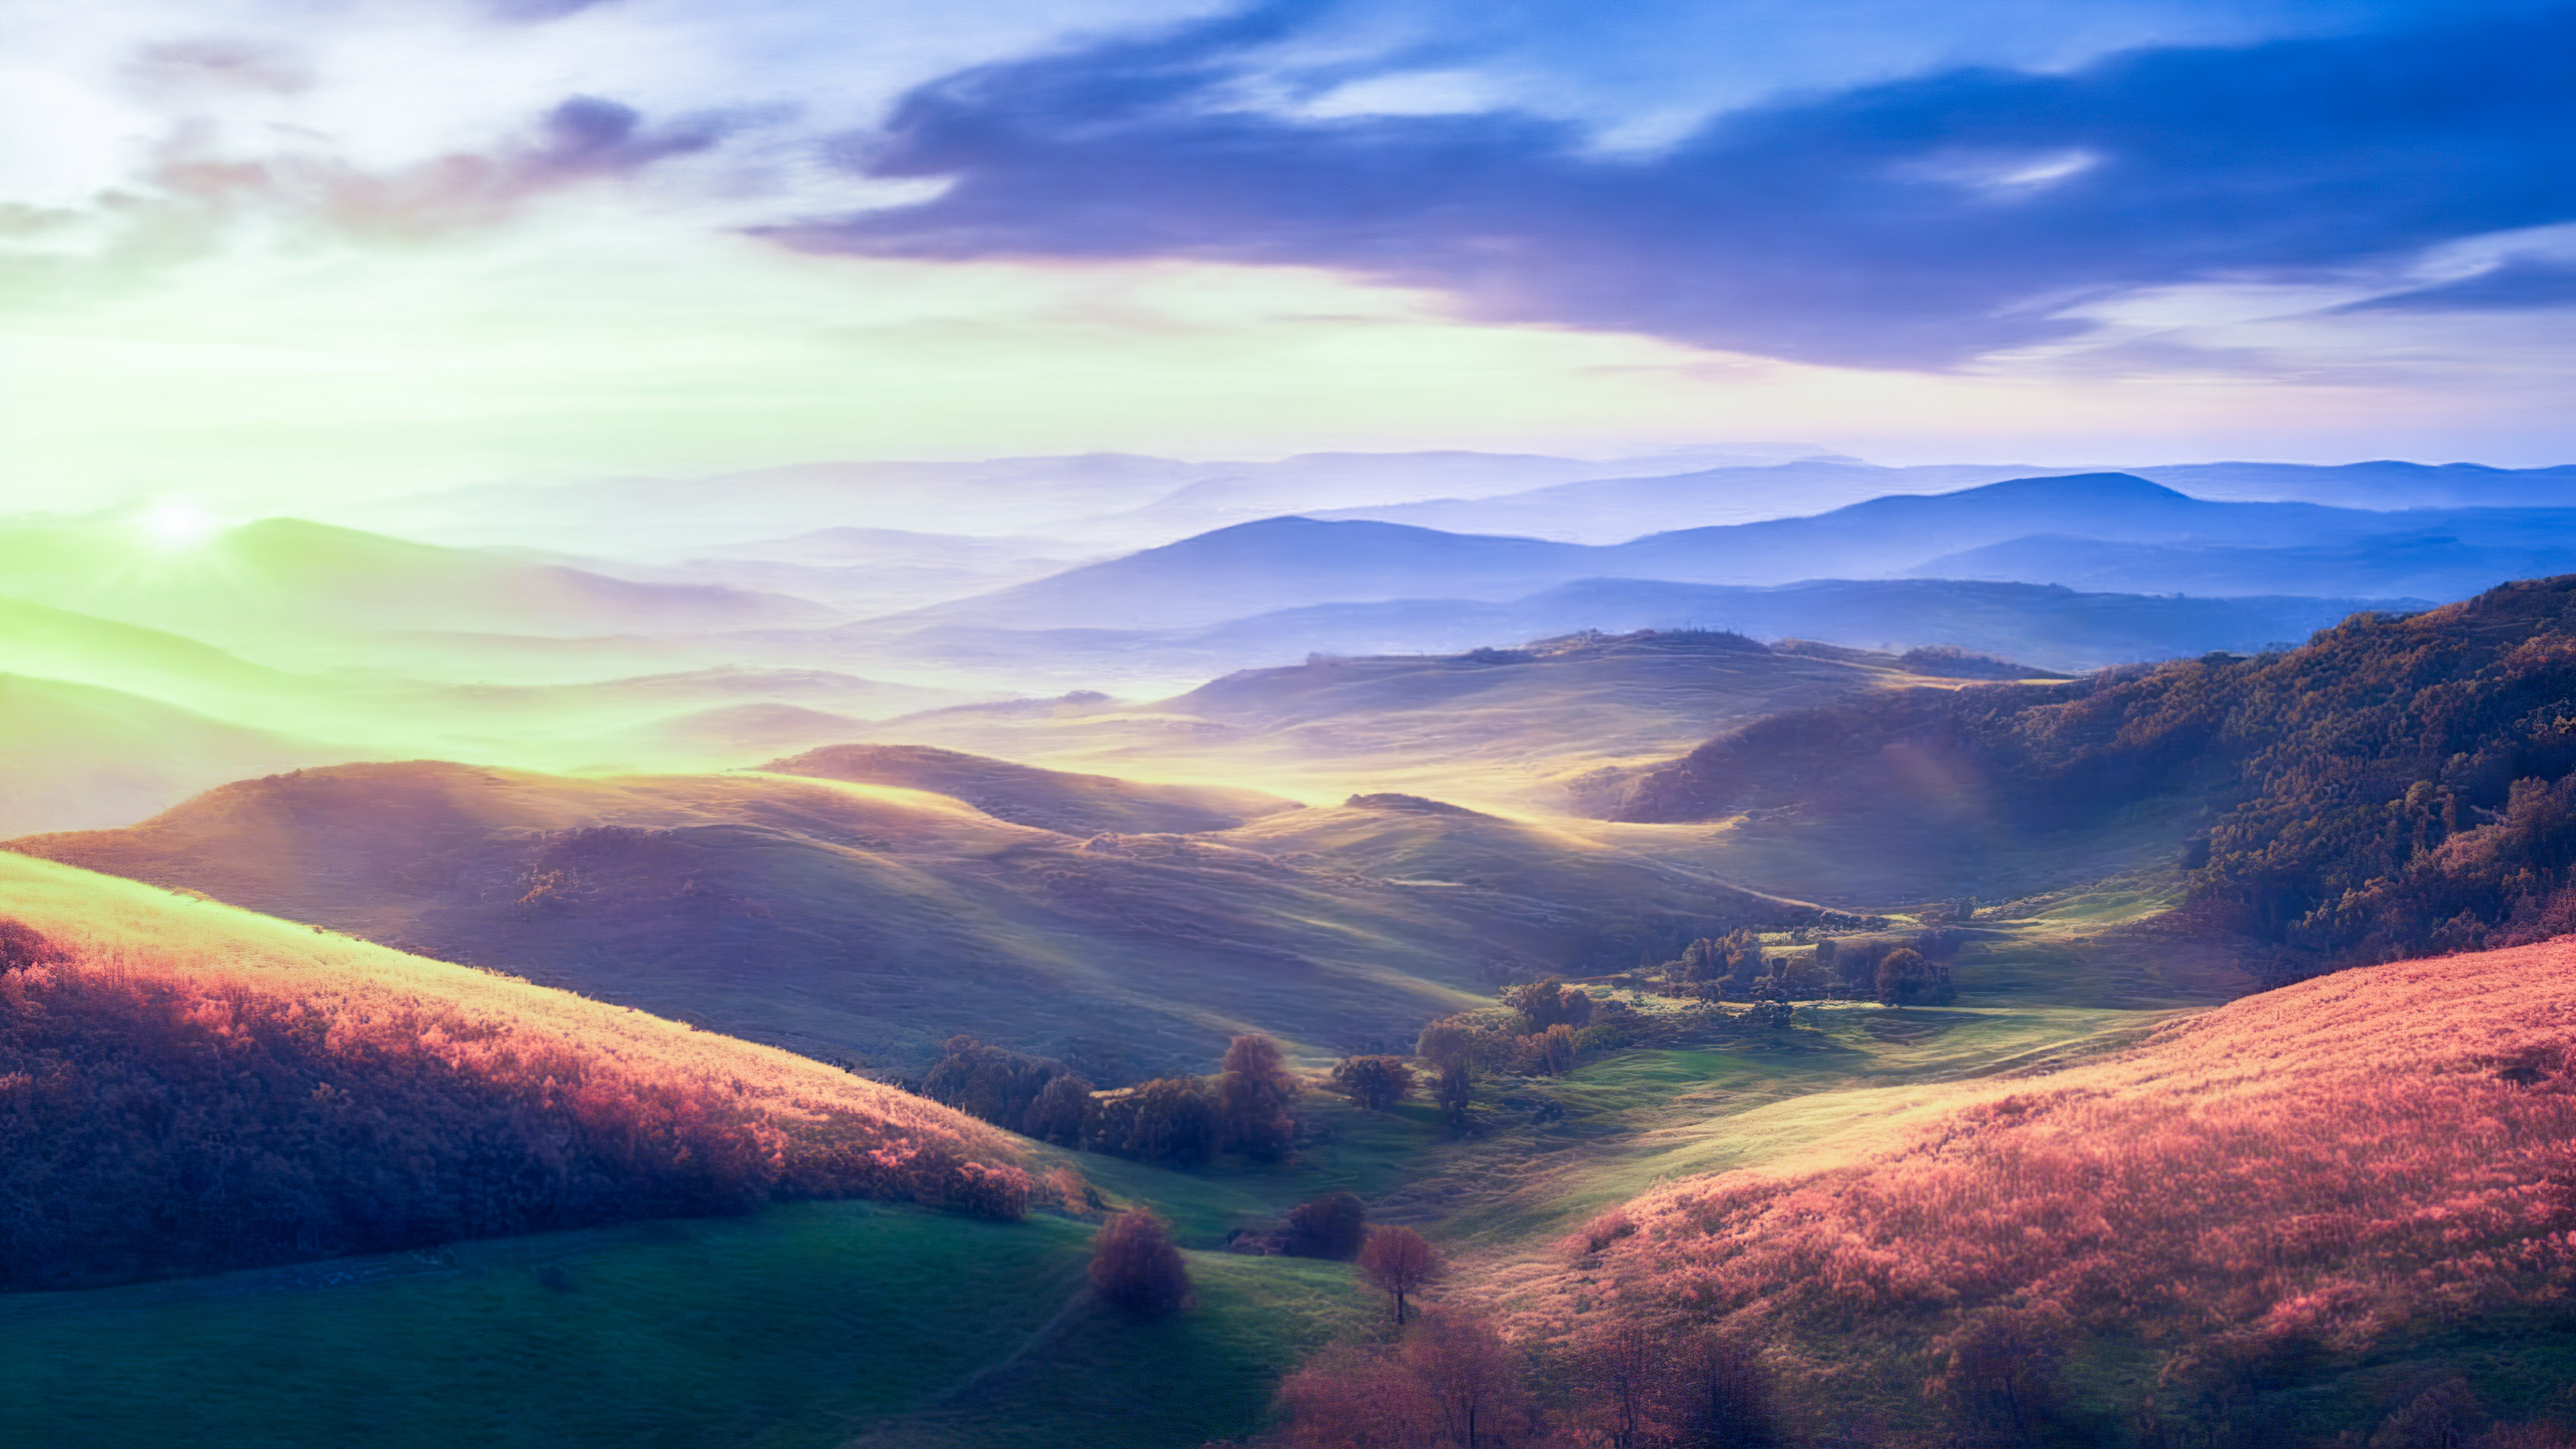 Get a glimpse of the early morning with our beautiful nature sunrise wallpaper, capturing a breathtaking sunrise over a tranquil countryside, with rolling hills and a warm, golden glow.